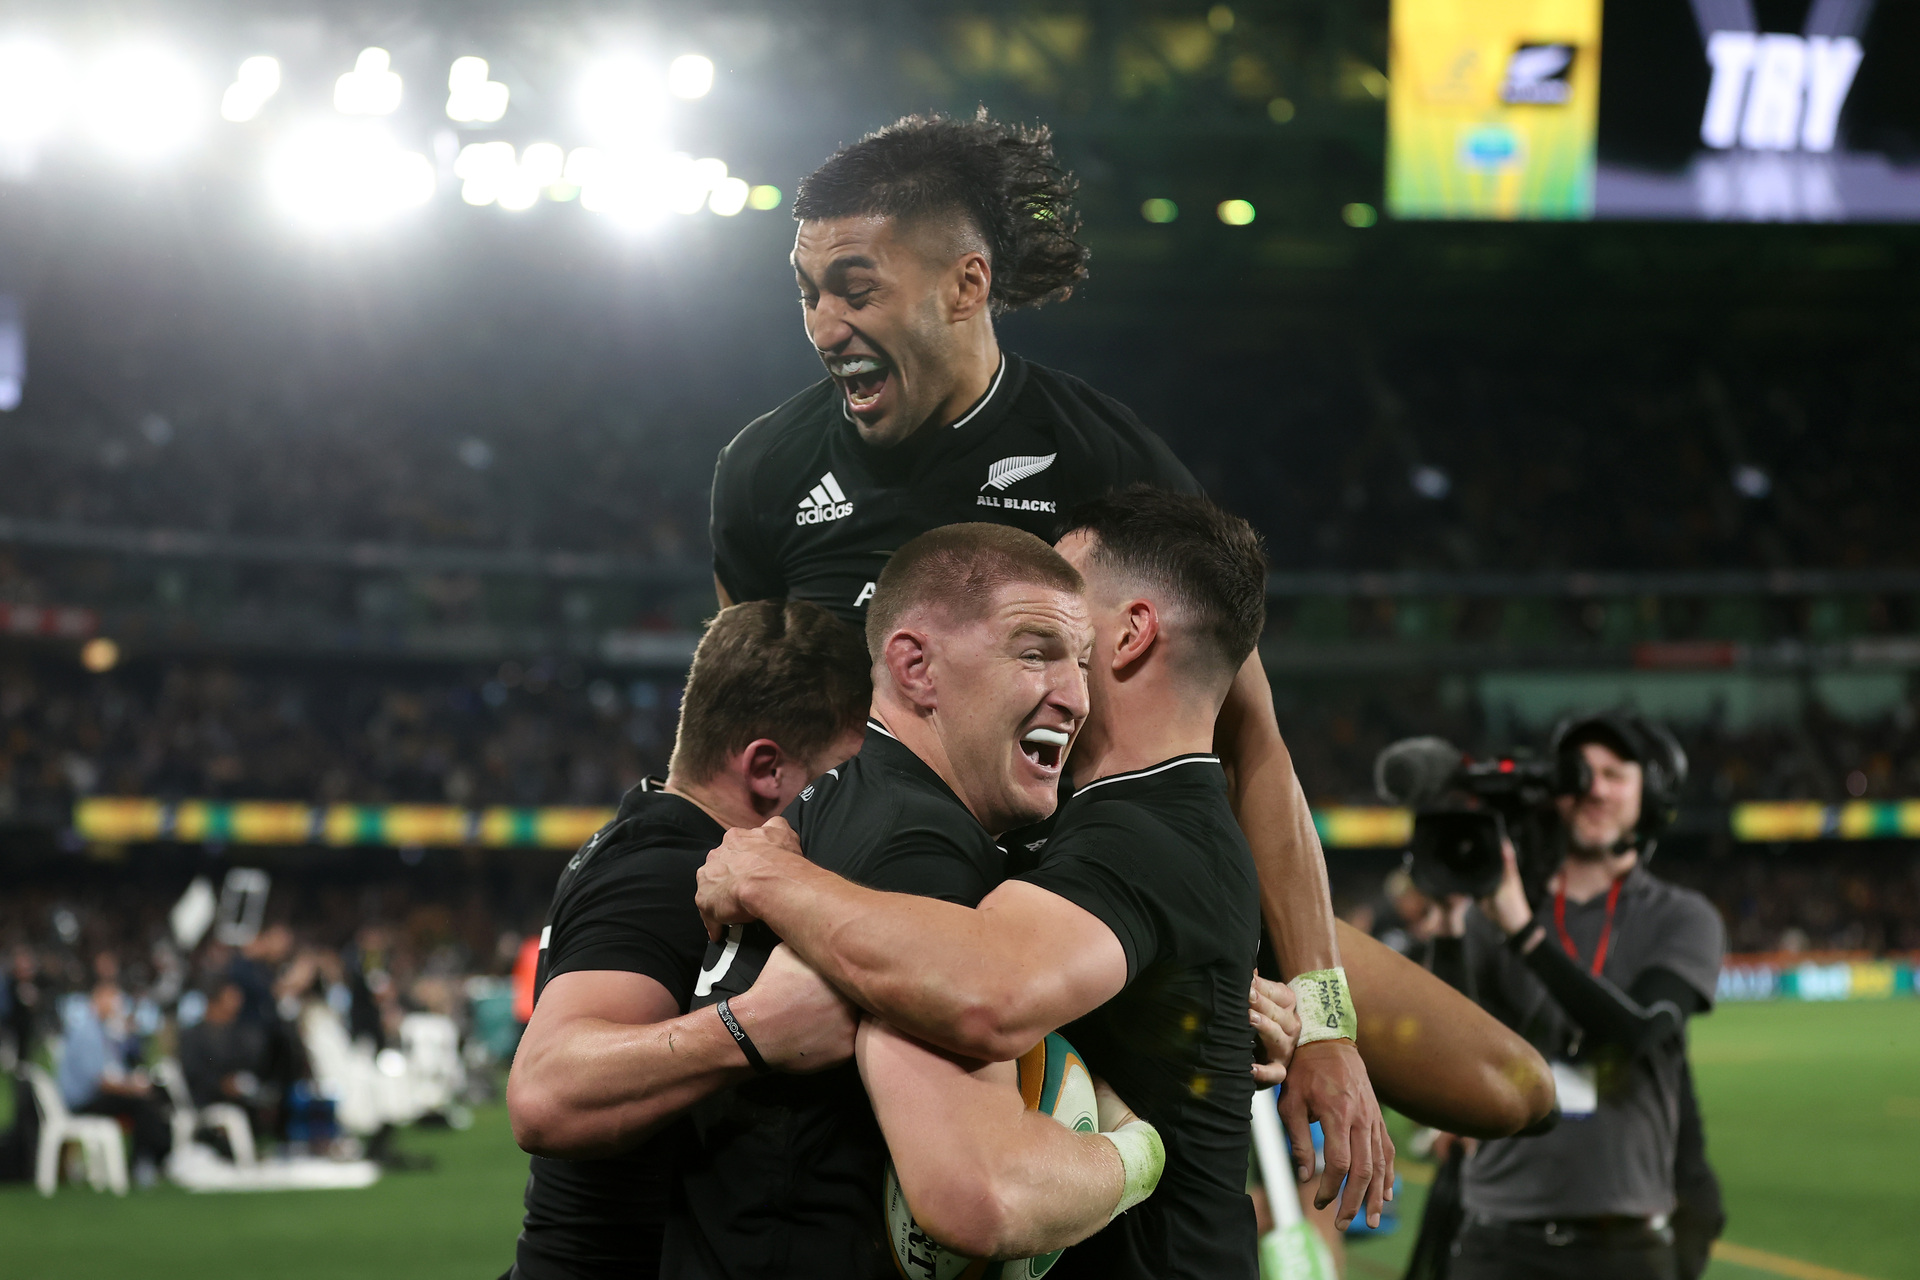 Rugby All Blacks win Bledisloe Cup over Wallabies in controversial finish involving referee